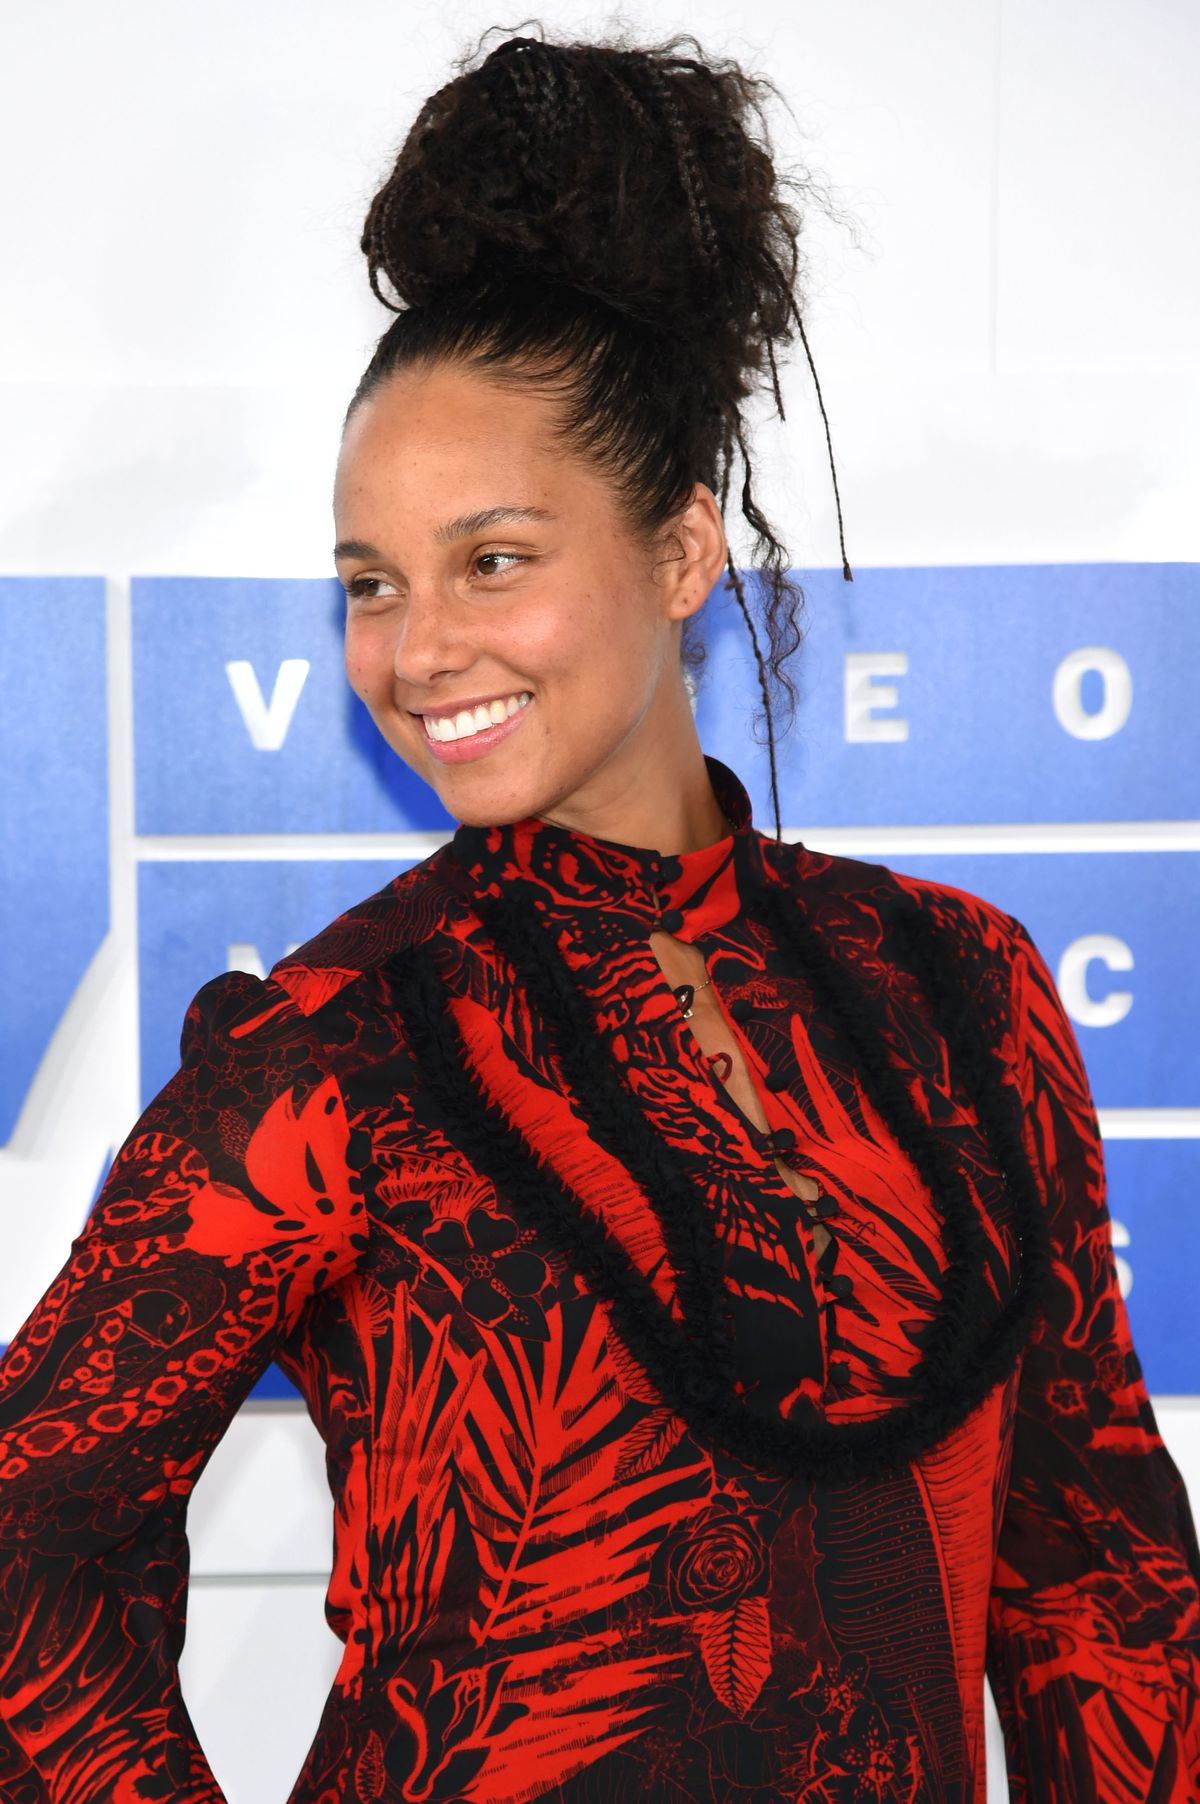 Alicia Keys without makeup at the MTV Video Music Awards in 2016